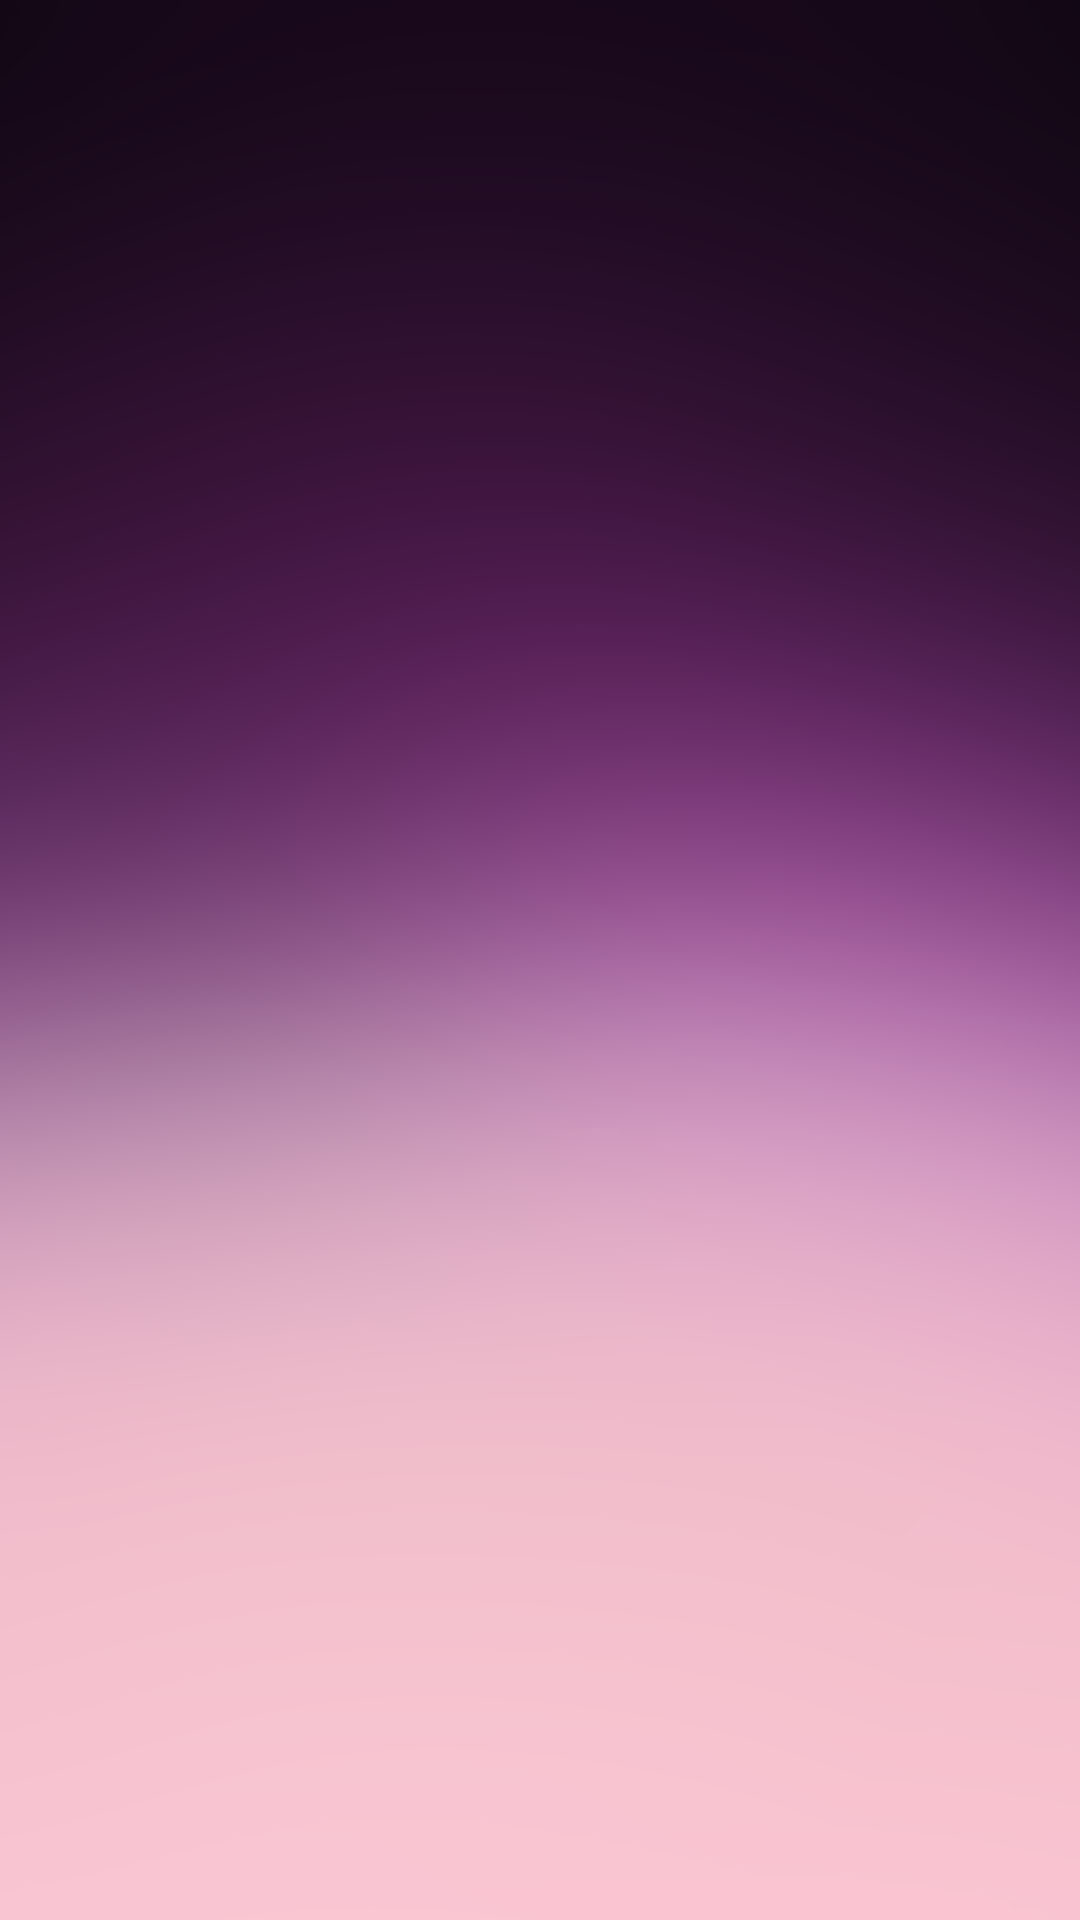 1080x1920 Purple Pink Gradient Simple Android Wallpaper